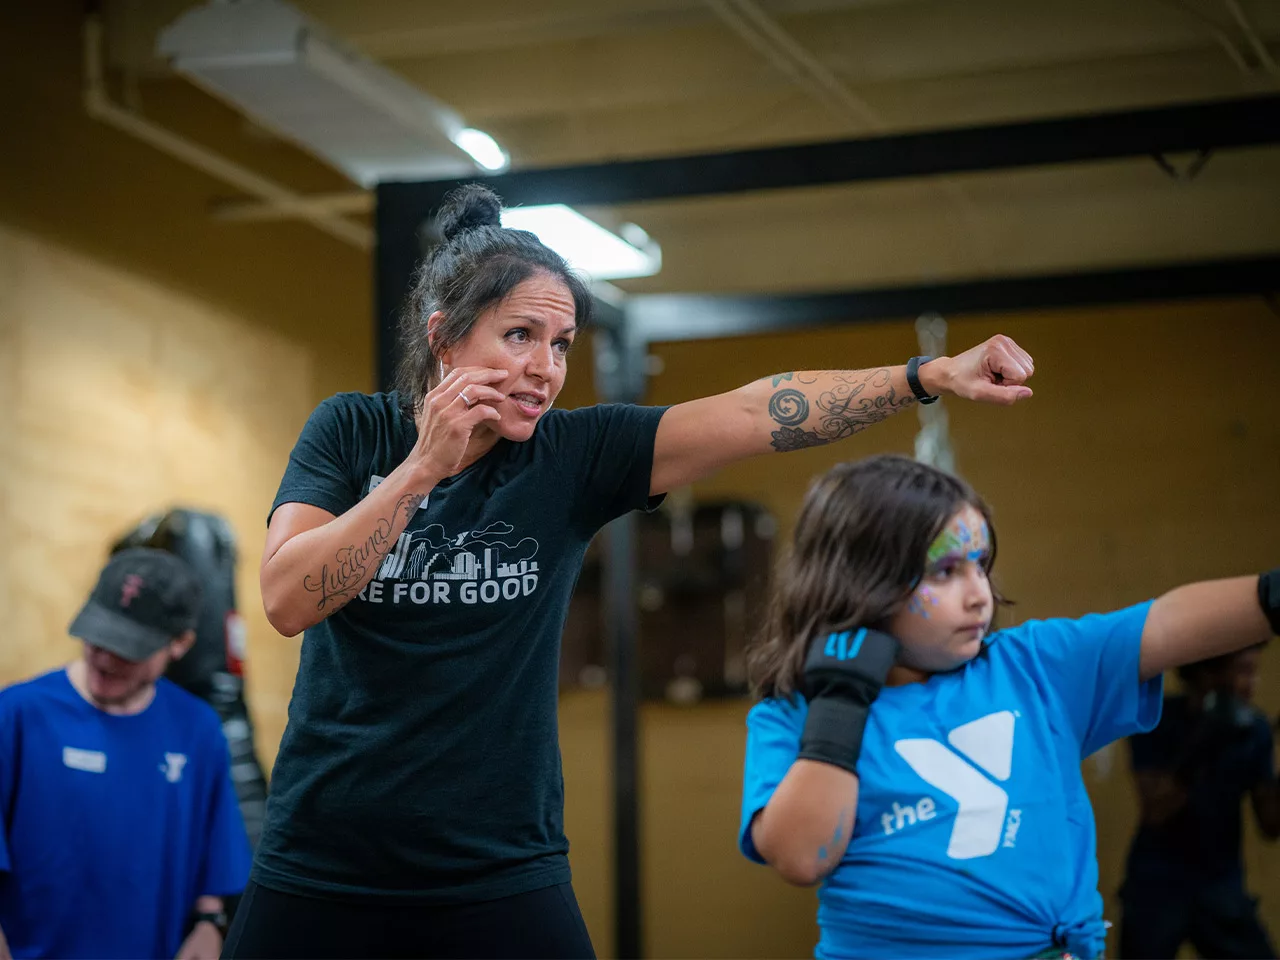 A woman demonstrates a boxing pose to a child.